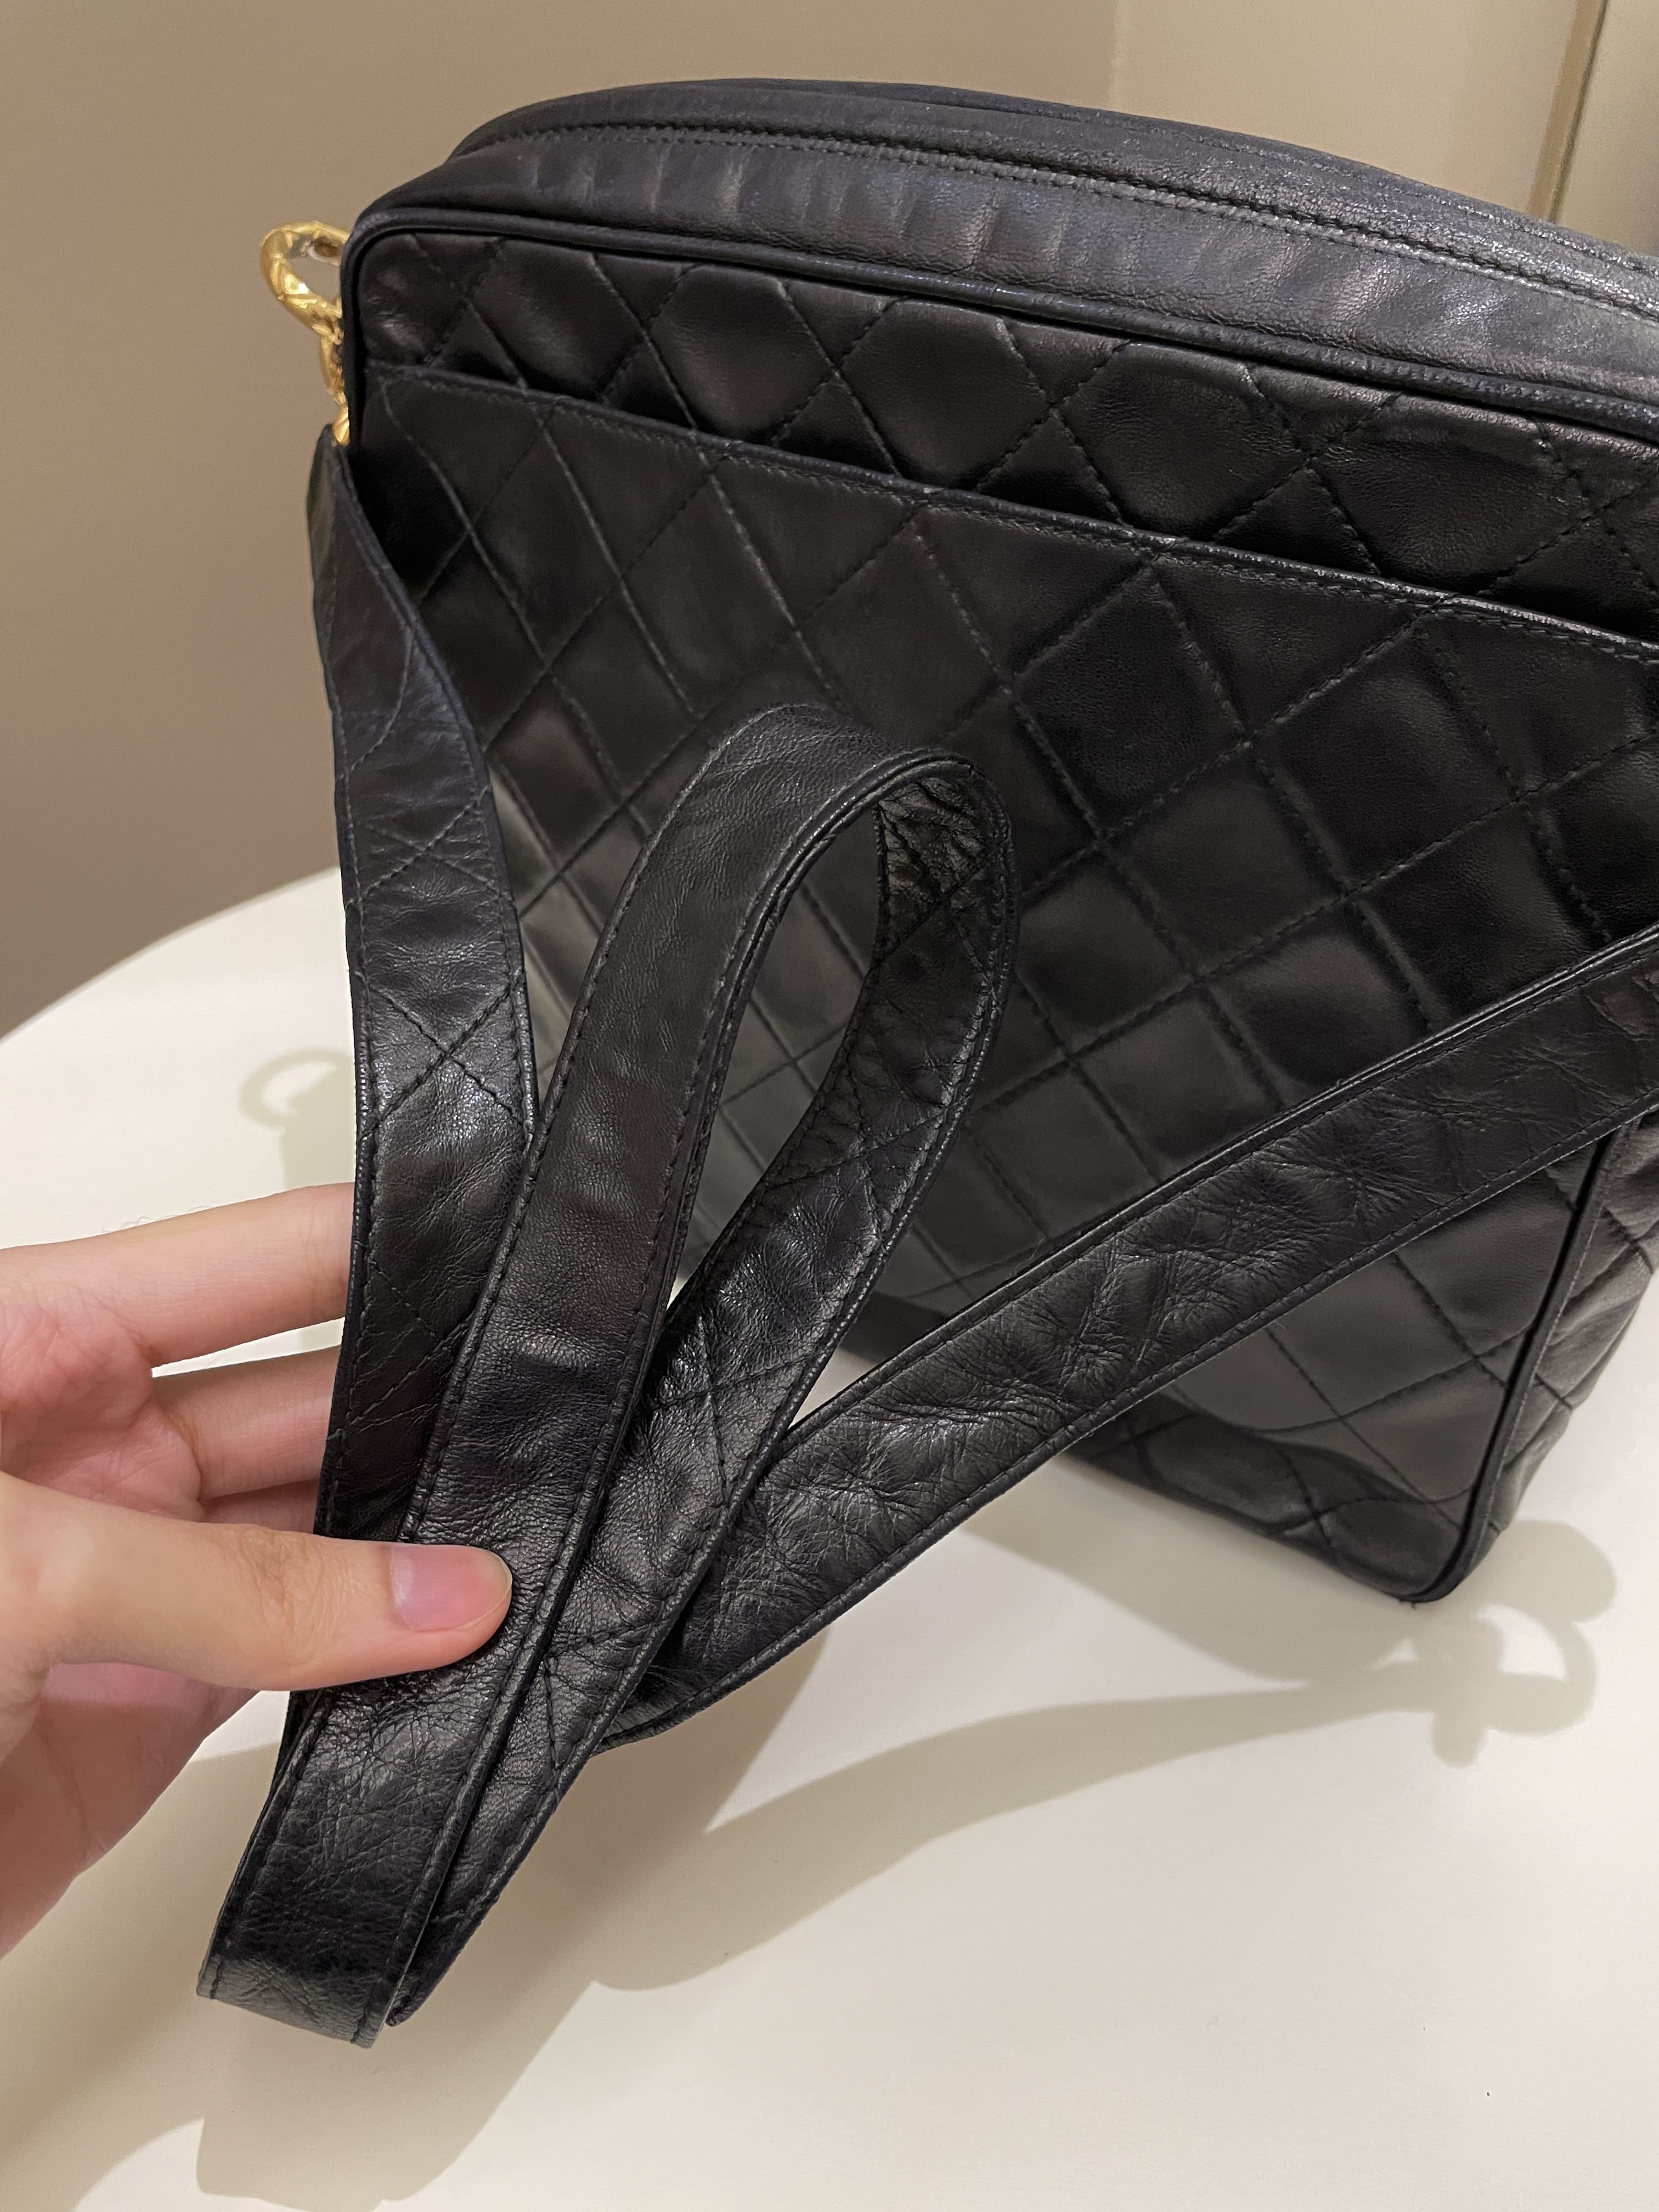 Chanel Vintage Quilted Cc Camera Bag